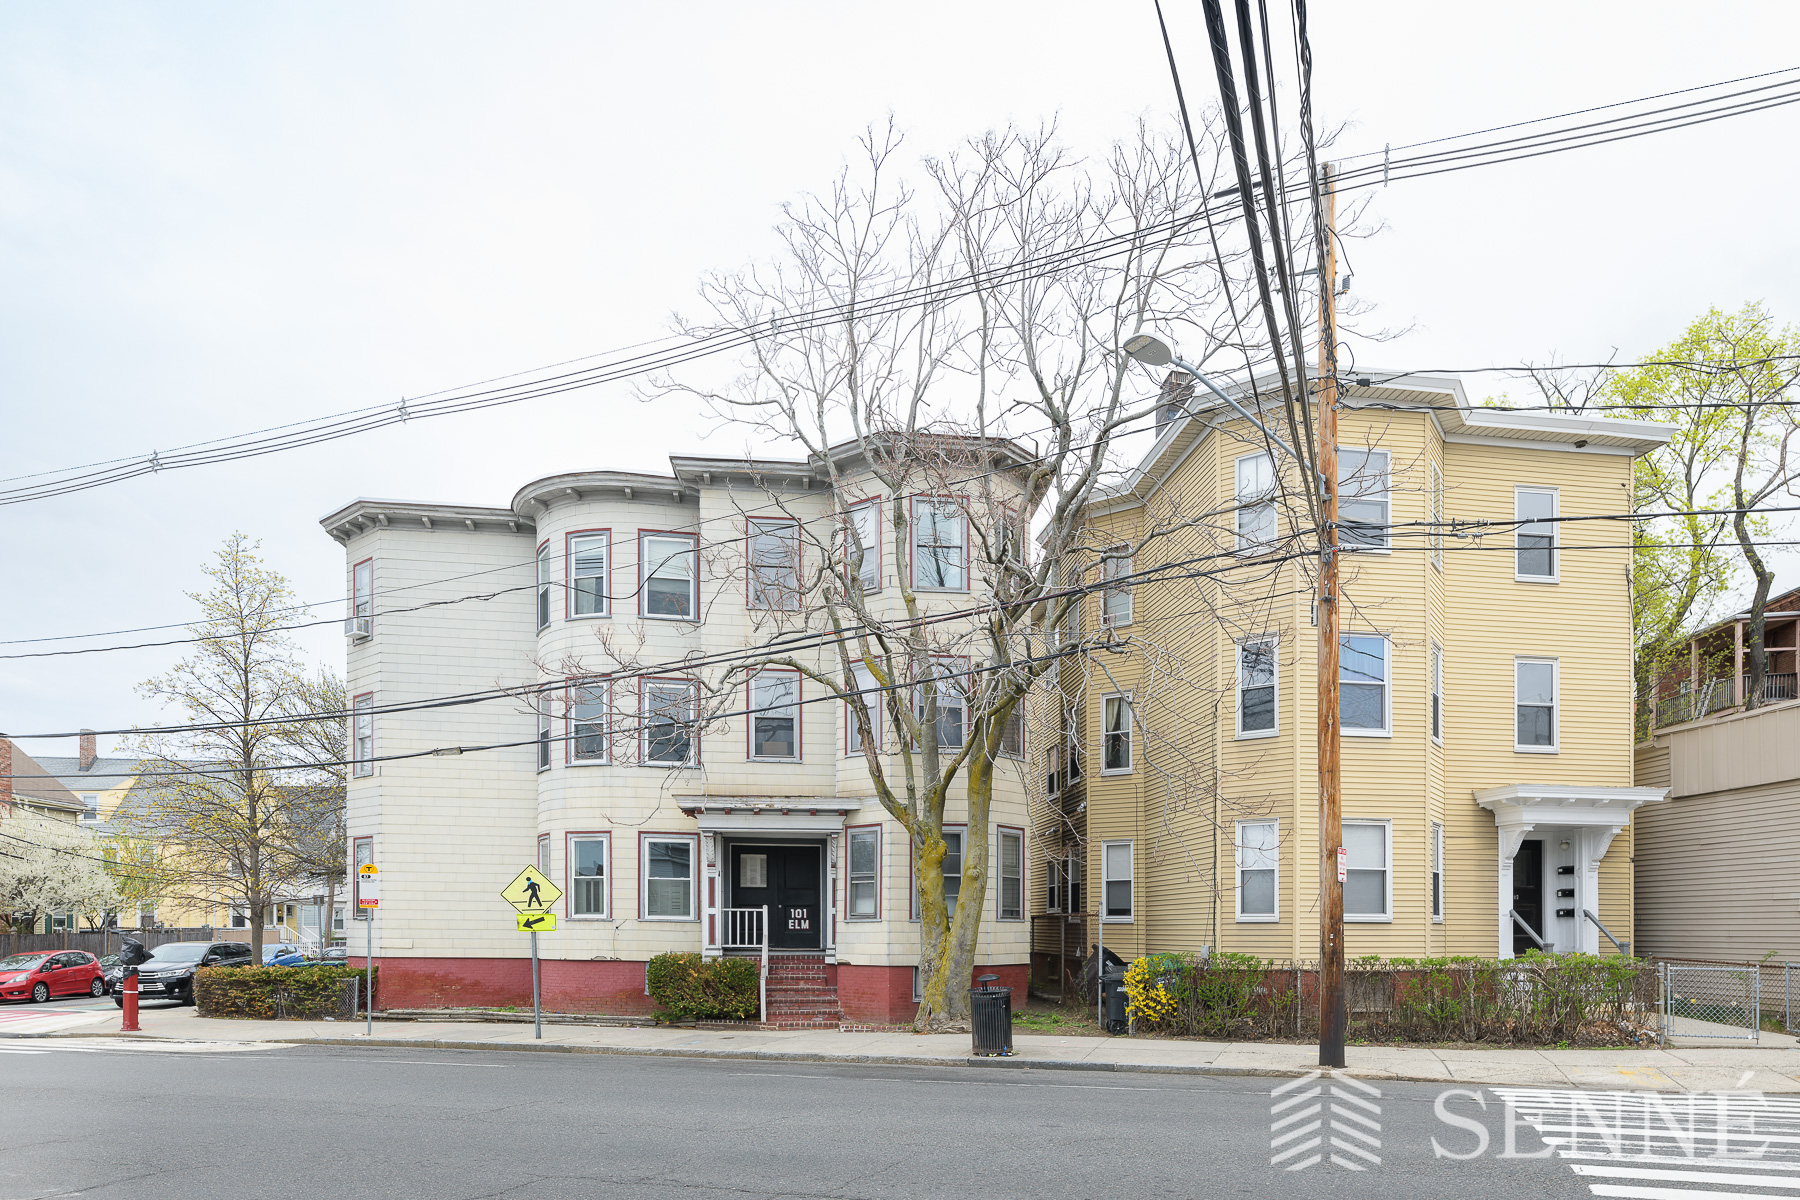 Photos of apartment on Elm St.,Somerville MA 02144